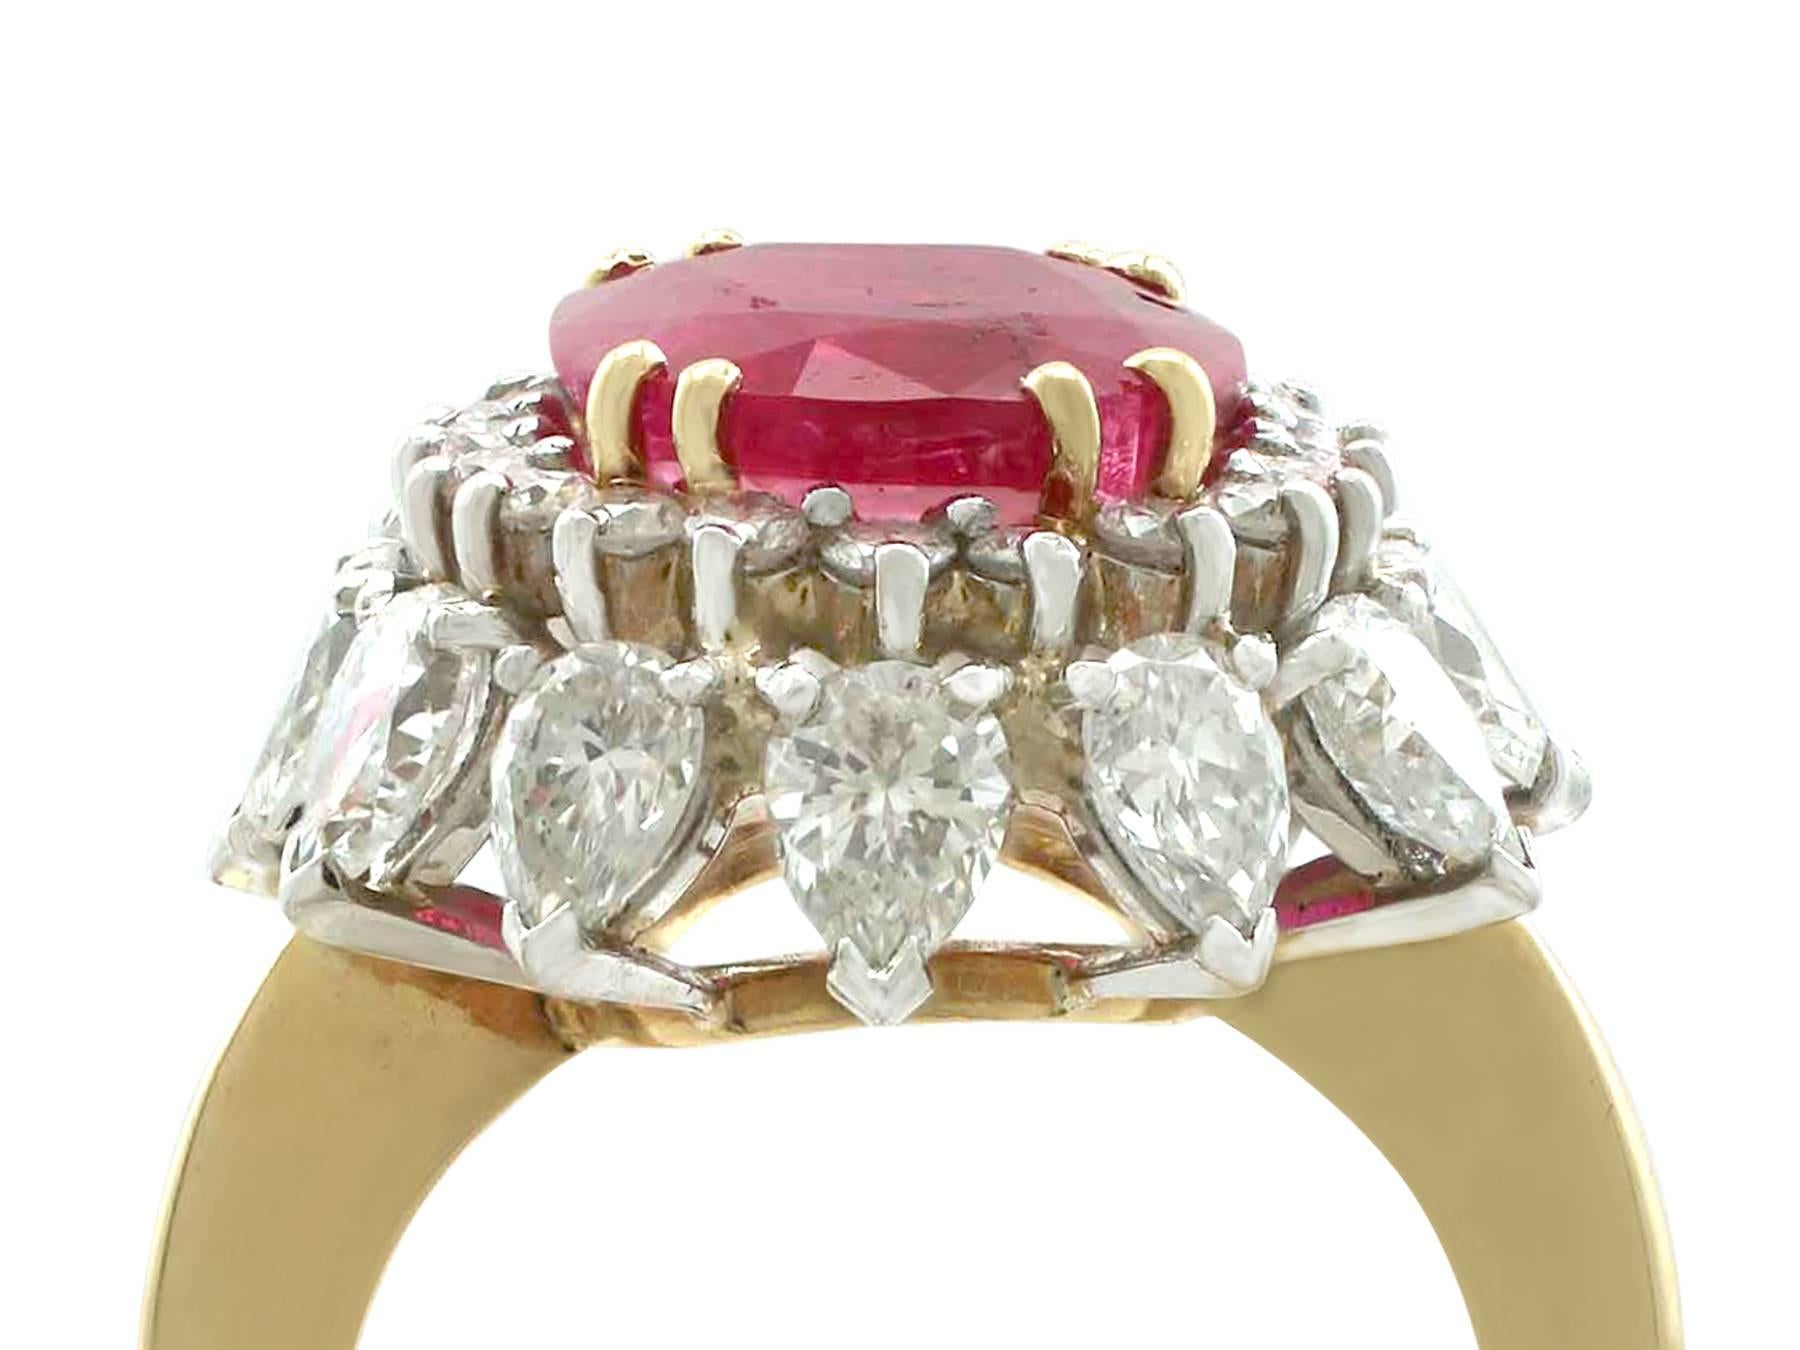 A stunning vintage 4.80 Ct natural Burmese ruby and 2.80 Ct diamond cocktail ring in 18k yellow gold; part of our vintage jewellery and estate jewelry collections.

This stunning, fine and impressive natural Burmese ruby and diamond ring has been